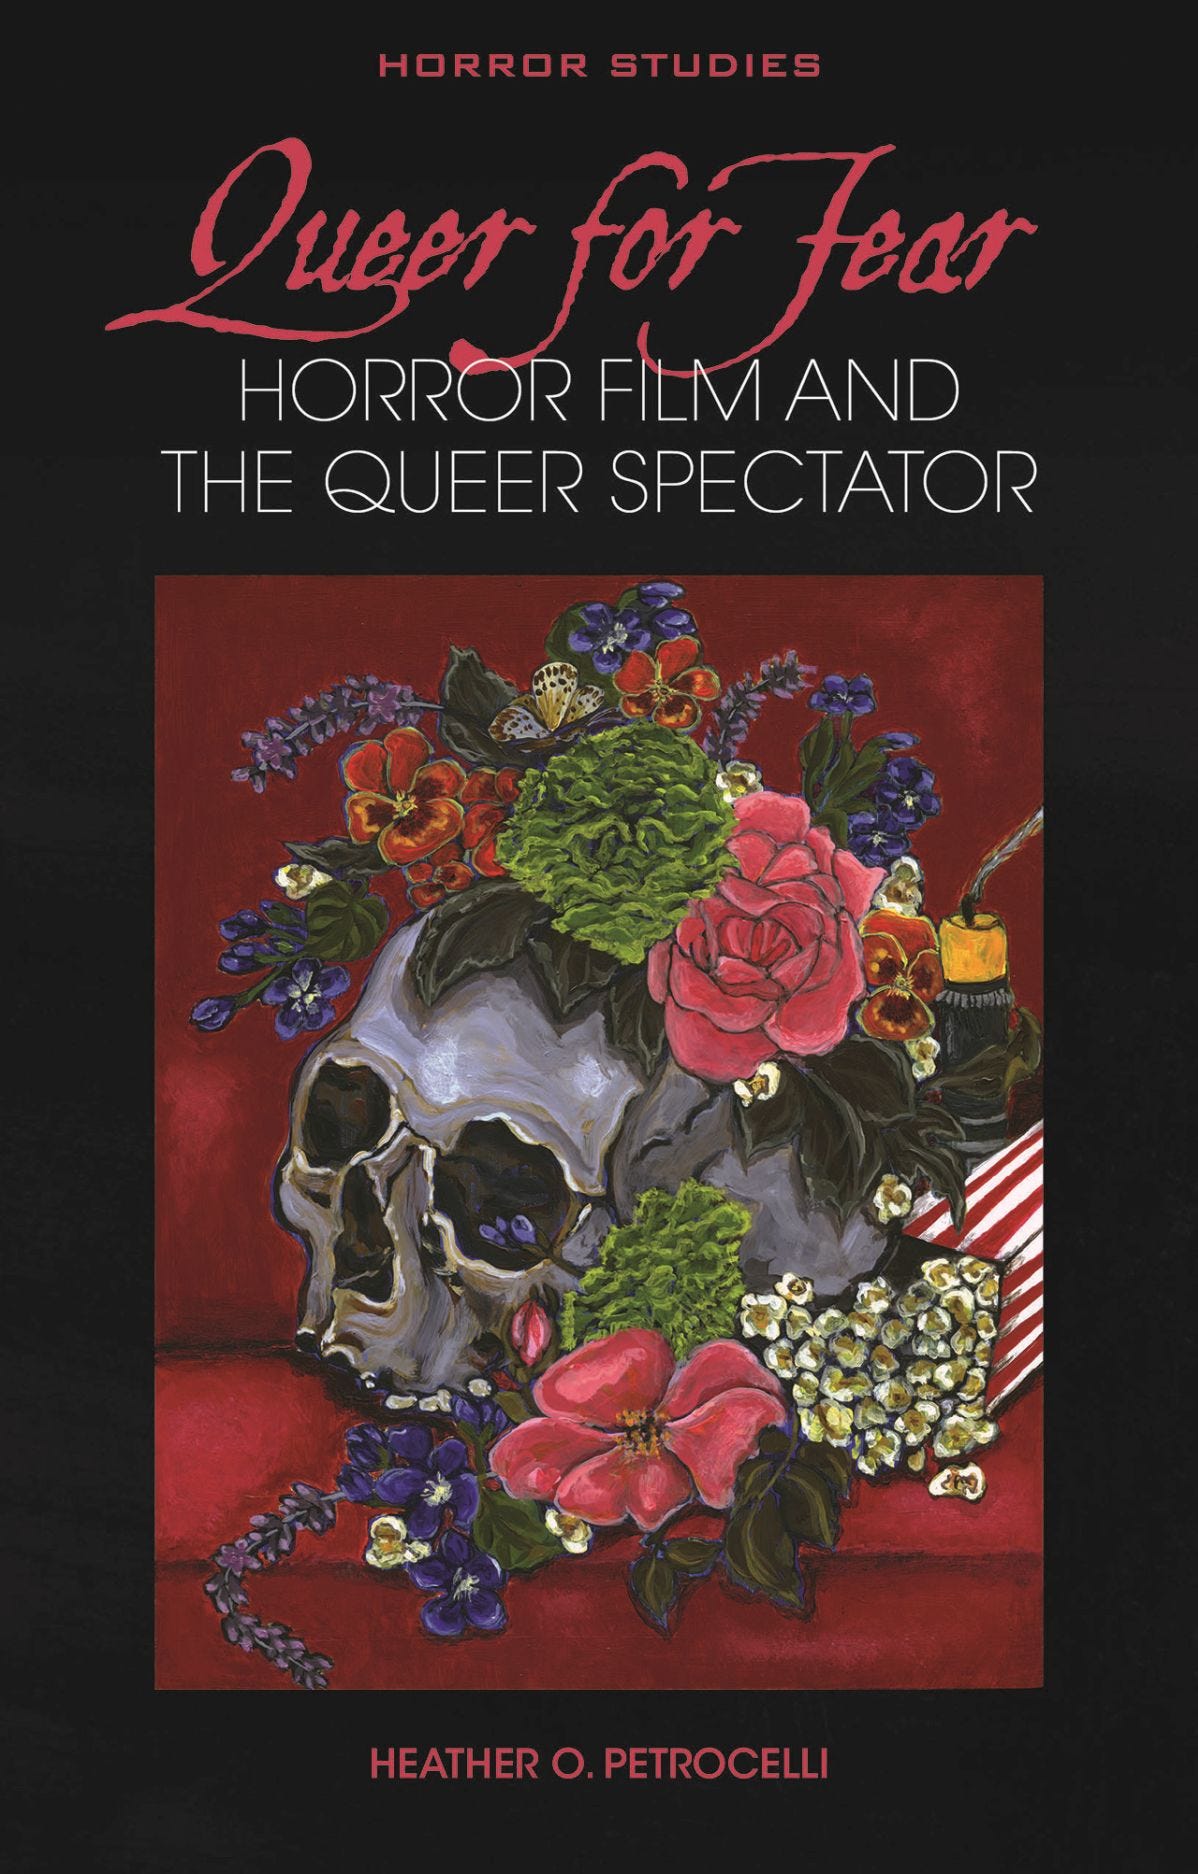 Black book cover that reads 'Horror Studies' across the top in all-caps above the title in hot-pink cursive font that reads 'Queer for Fear' above the white font subtitle: Horror film and the queer spectator'. The central image is a painting of a flower-crowned skull on a red velvet theatre seat next to a yellow snuffed-out candle and a spilled popcorn bucket. Below the painting image is the author's name: Heather O. Petrocelli